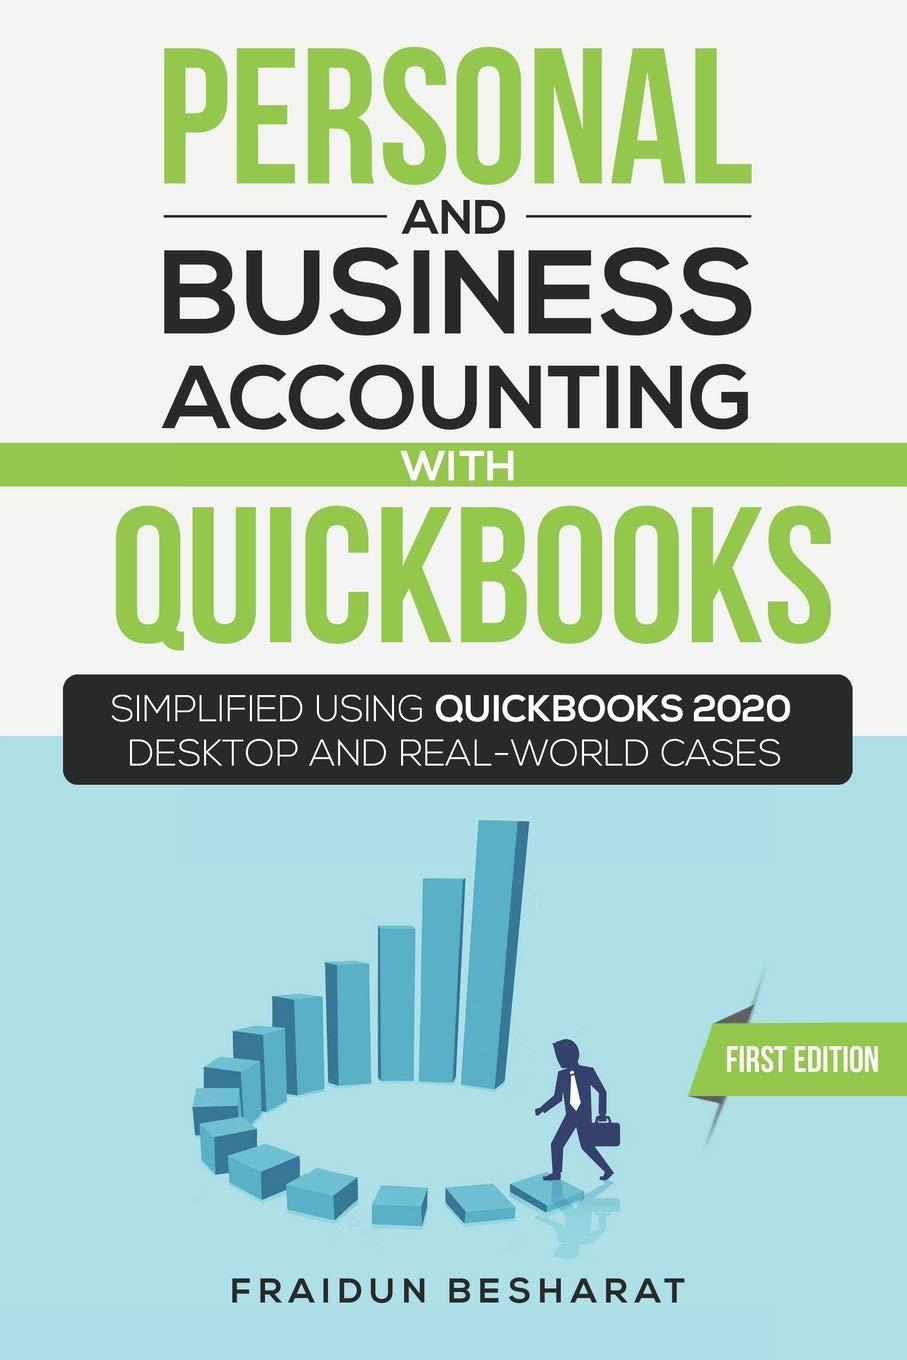 personal and business accounting with quickbooks 1st edition fraidun besharat 8653586679, 979-8653586675